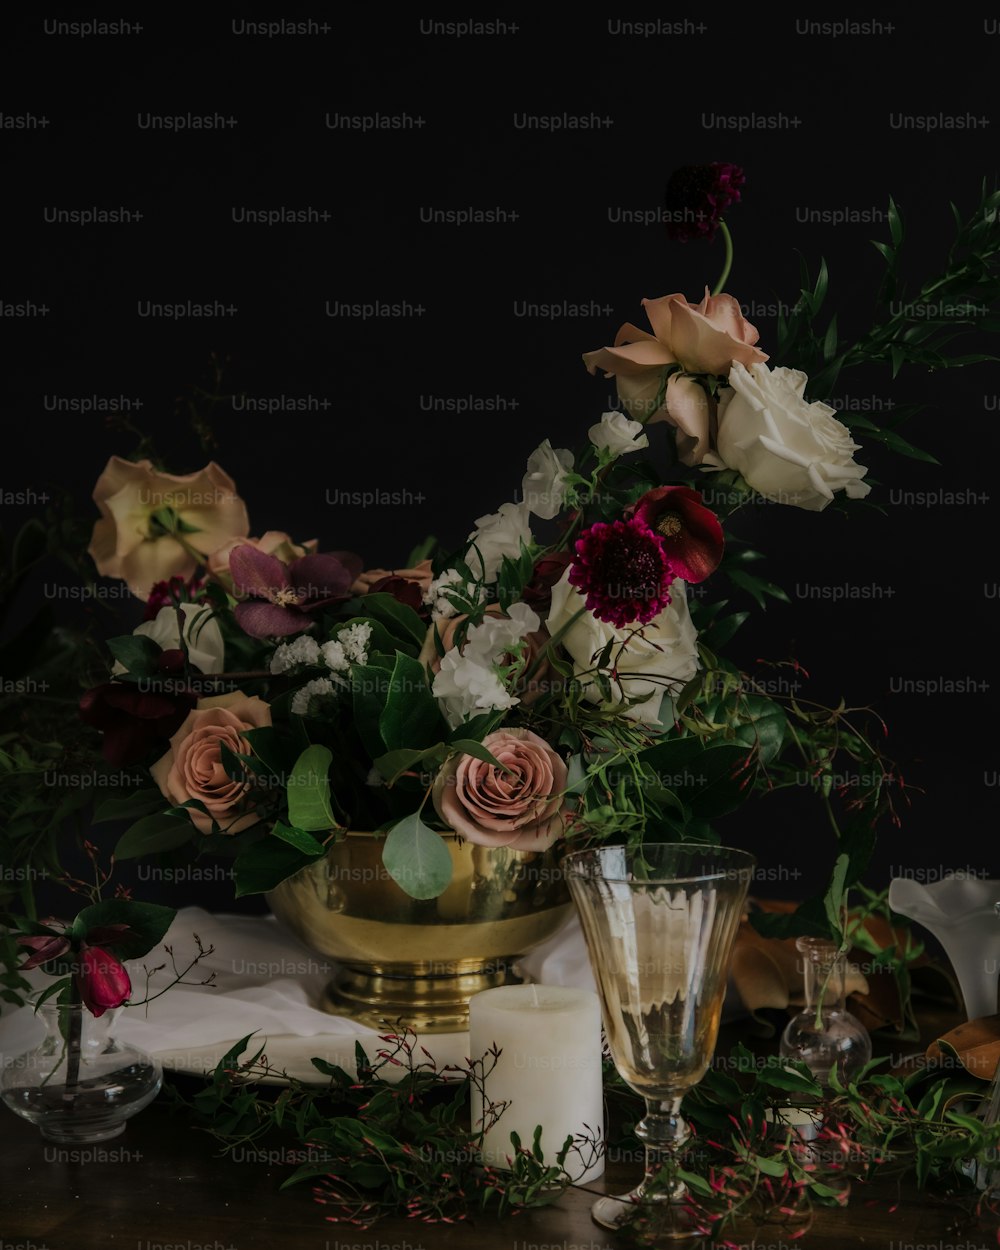 a table topped with a vase filled with flowers